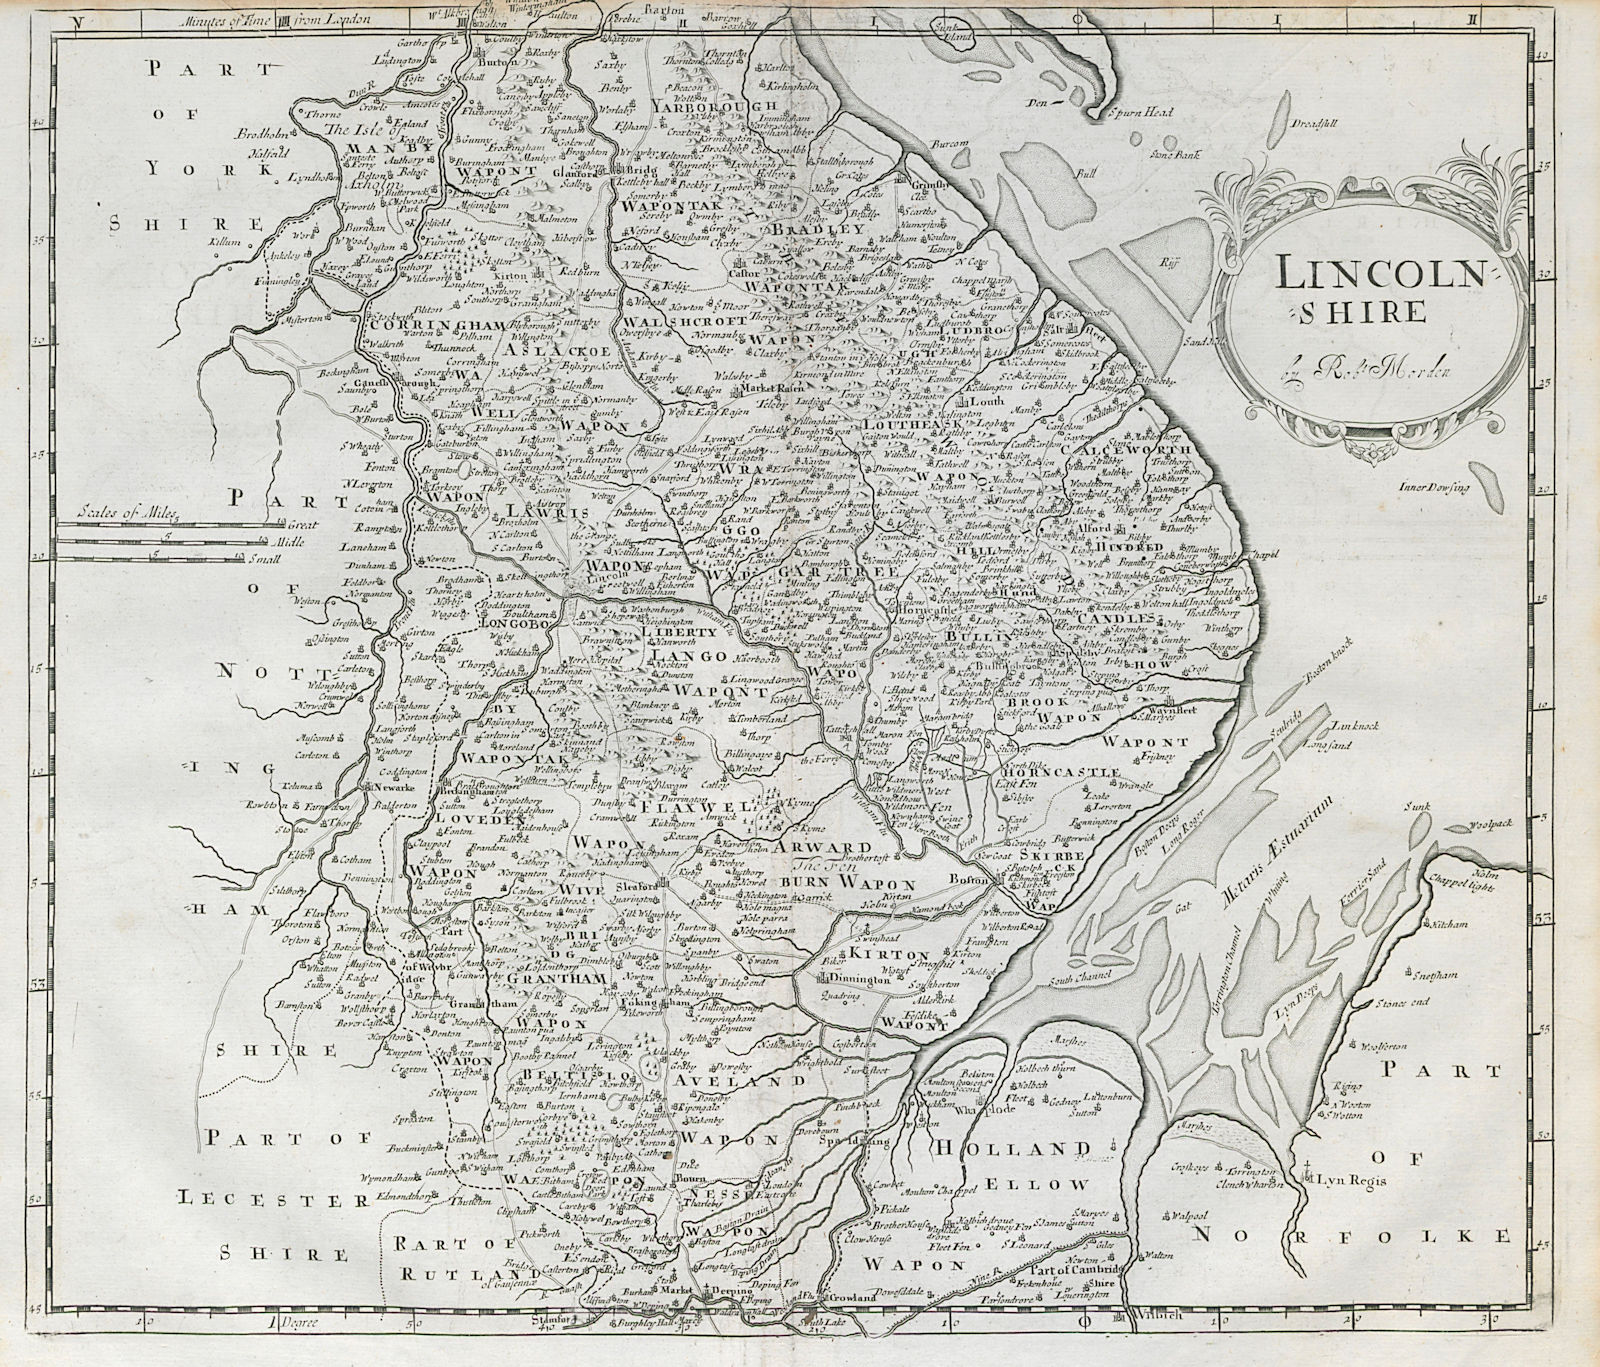 Lincolnshire. 'LINCOLN SHIRE' by ROBERT MORDEN from Camden's Britannia 1722 map